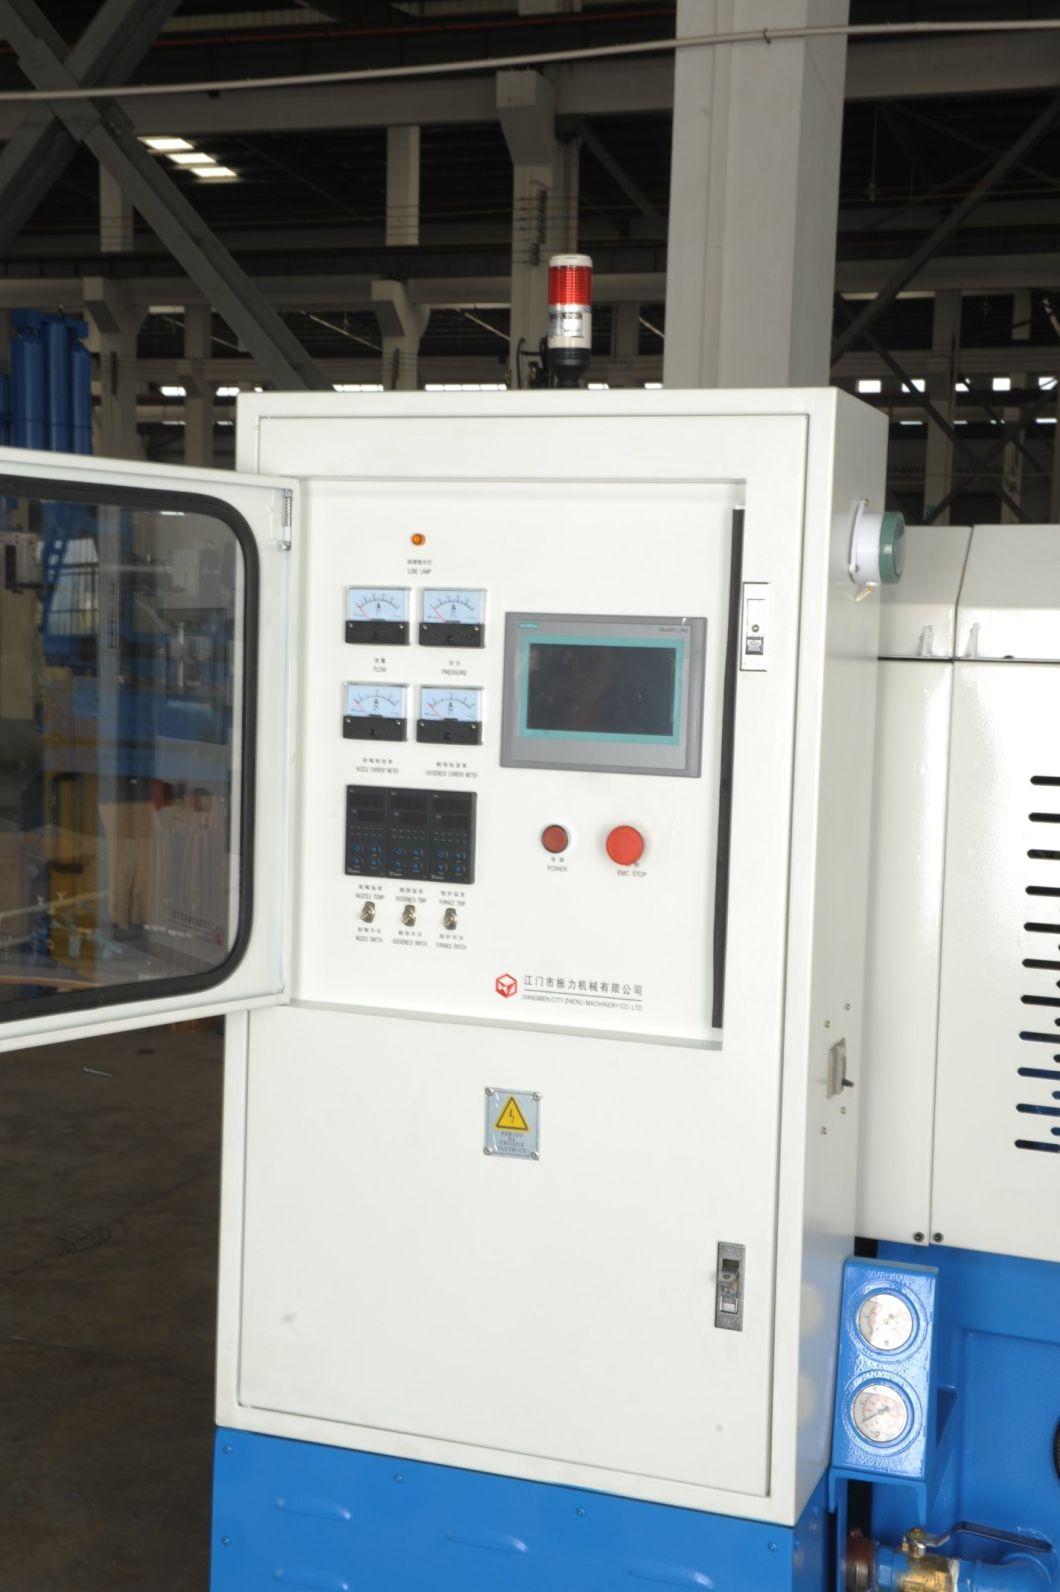 Zhenli-High Pressure Metal Injection Moulding Machinery with Excellent Performance